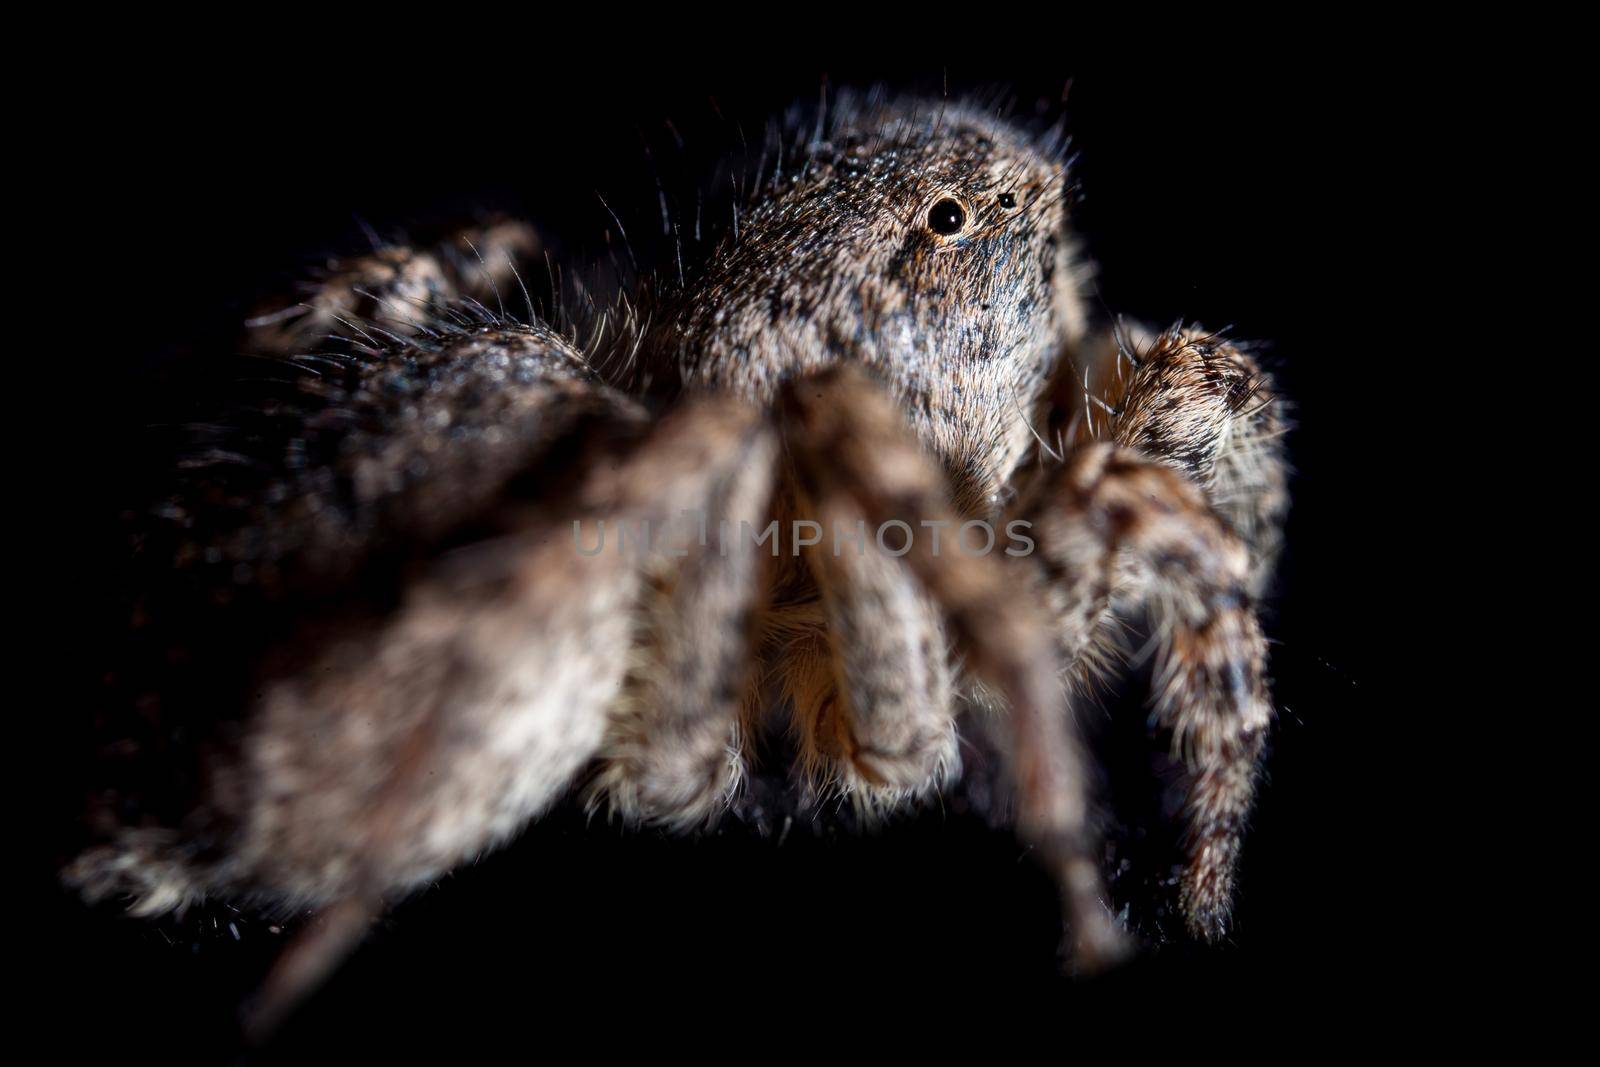 Portrait of a Jumping spider isolated on black background